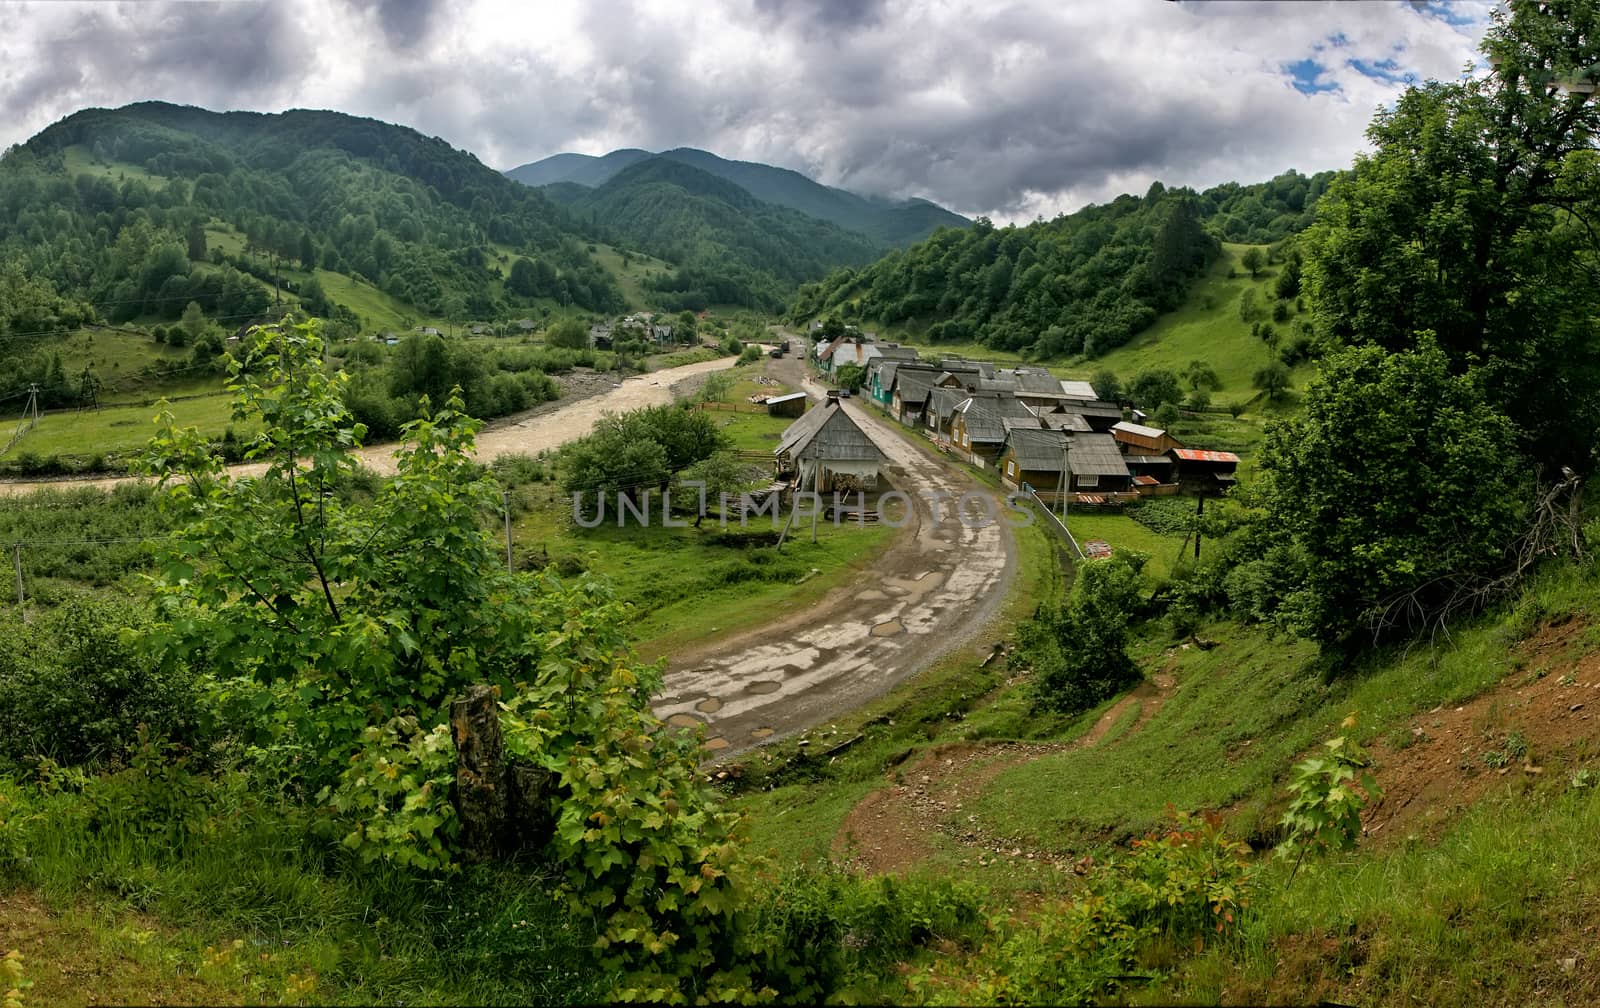 Ecotourism. Rural landscape. An old village in a picturesque place among the hills and mountains overgrown with green trees. The road passes through the village.